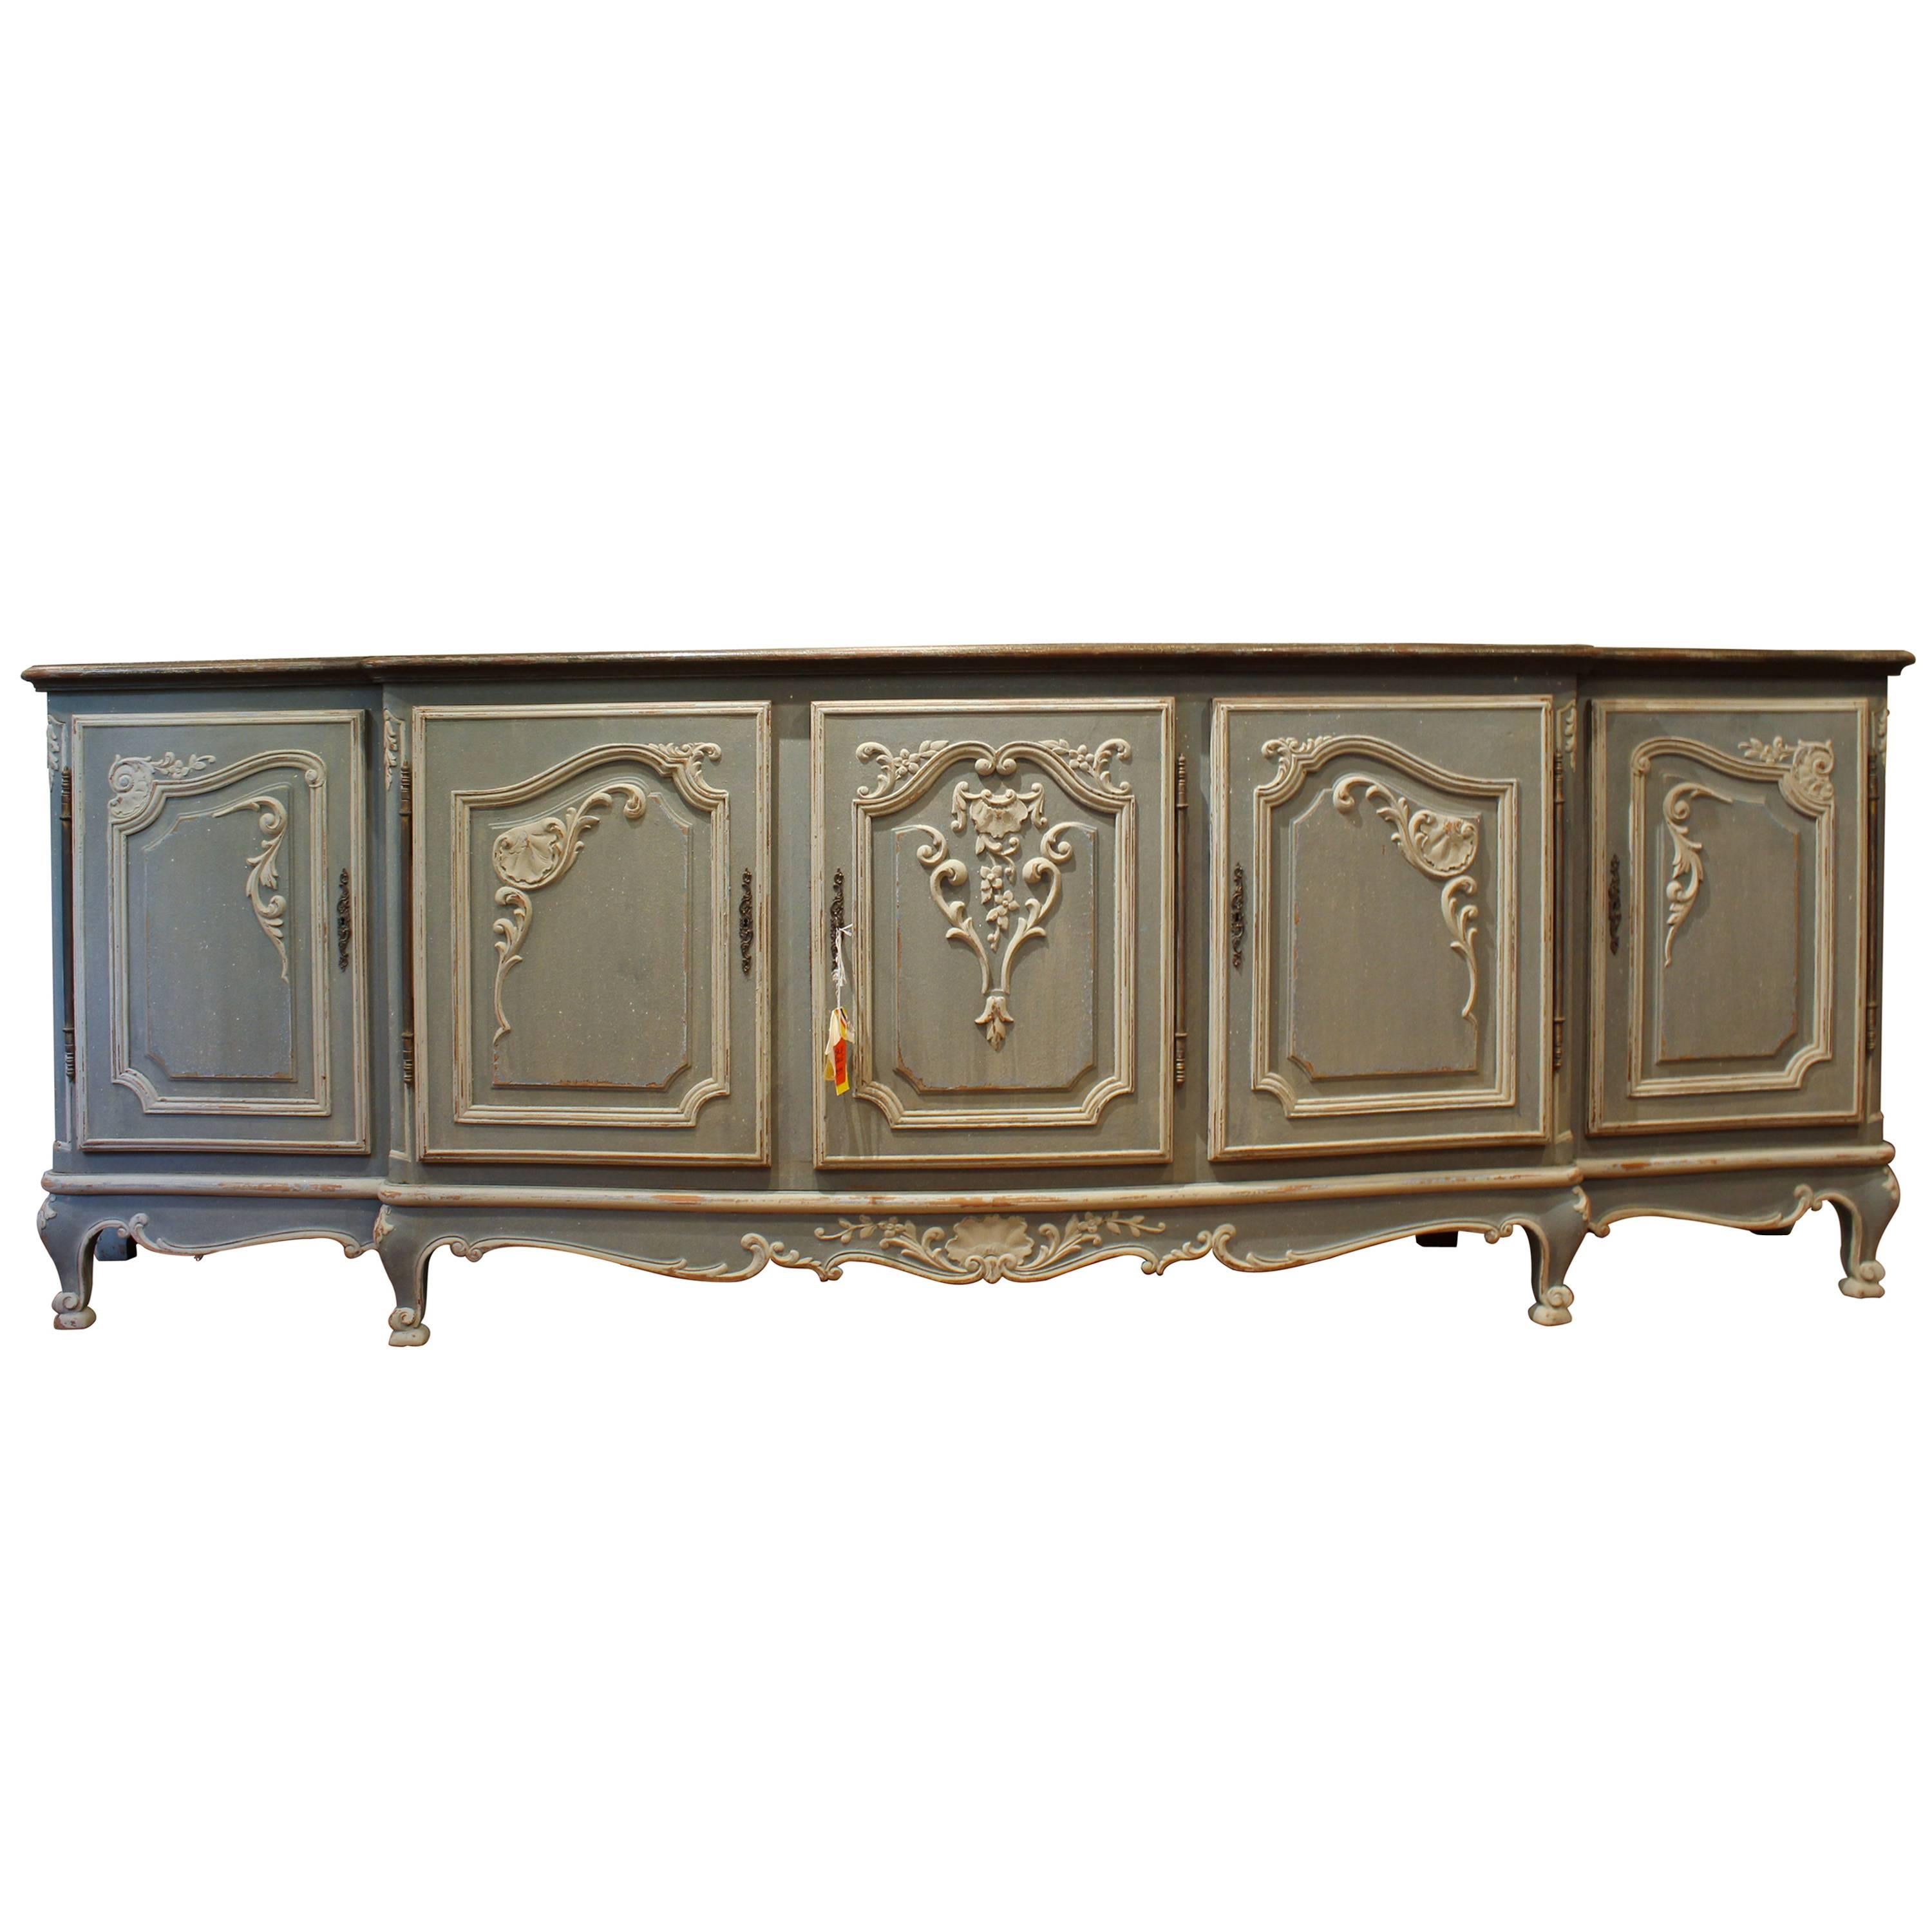 Extremely Grand Antique French Regence Enfilade For Sale